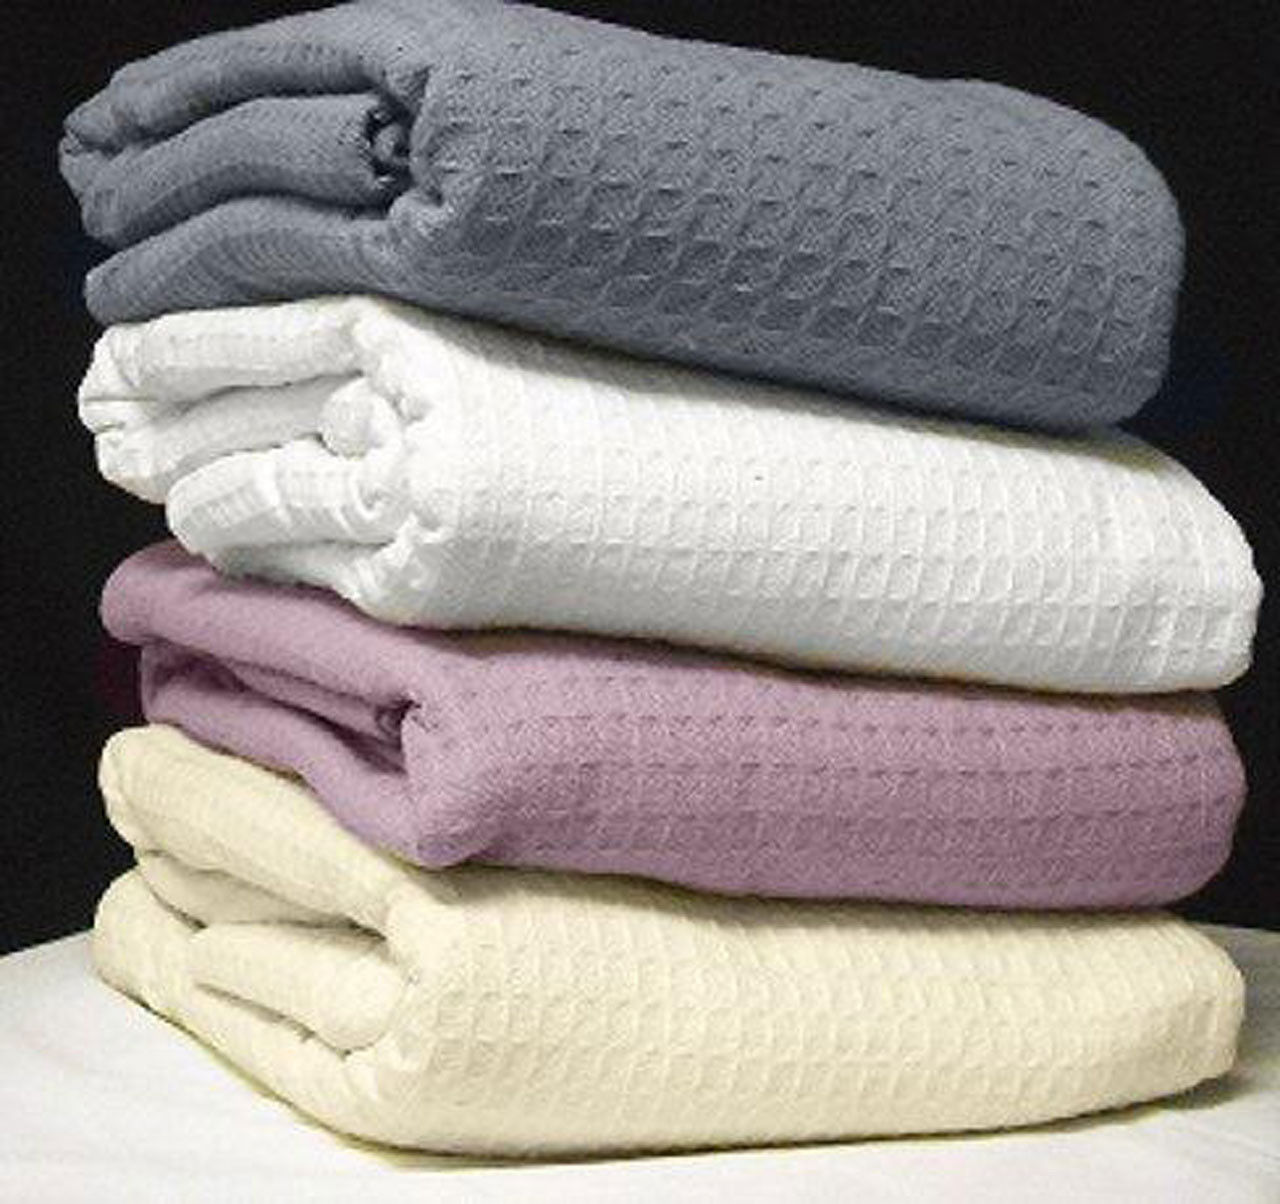 How does the weight quality of the Santa Clarita blanket compare to other cotton thermal blankets?